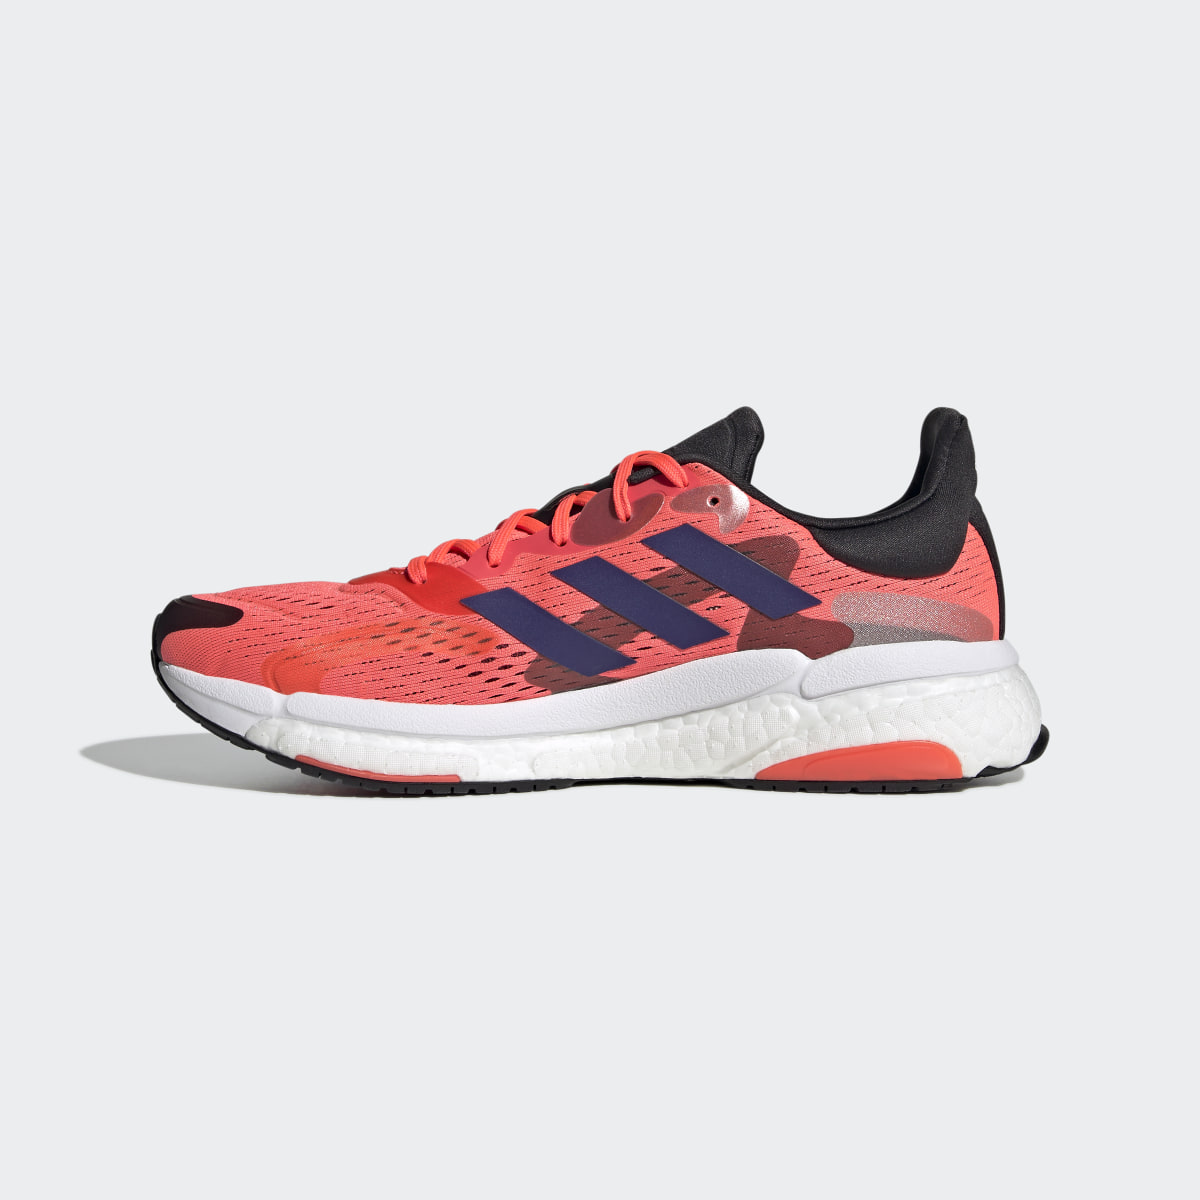 Adidas Solarboost 4 Shoes. 7